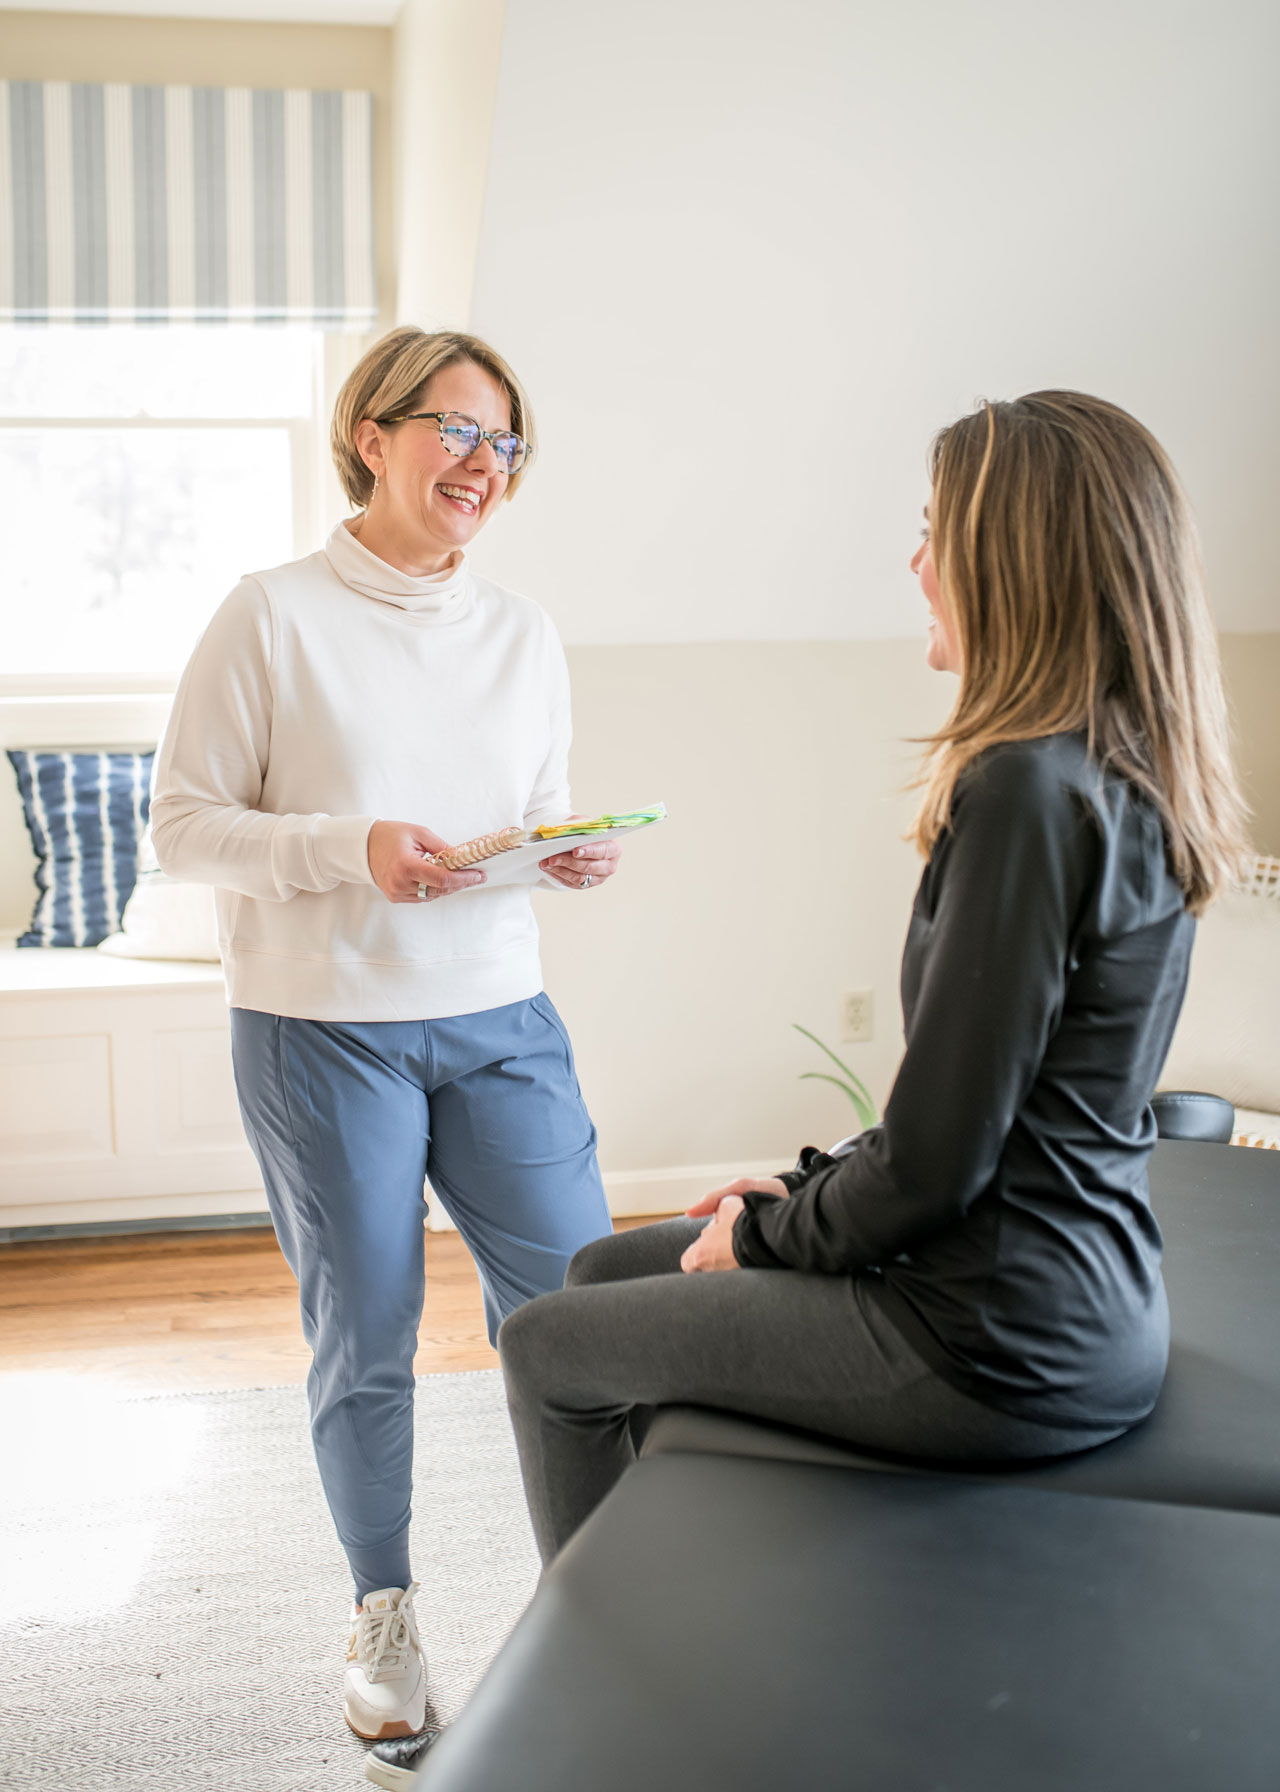 Jess speaking with Client | Full Circle Wellness | Physical Therapy & Health Coaching | Orthopaedic Injury | Pain Management | Injury Prevention | Sports Medicine | Wellness Assessments | Nutrition & Weight Loss | Newbury, MA